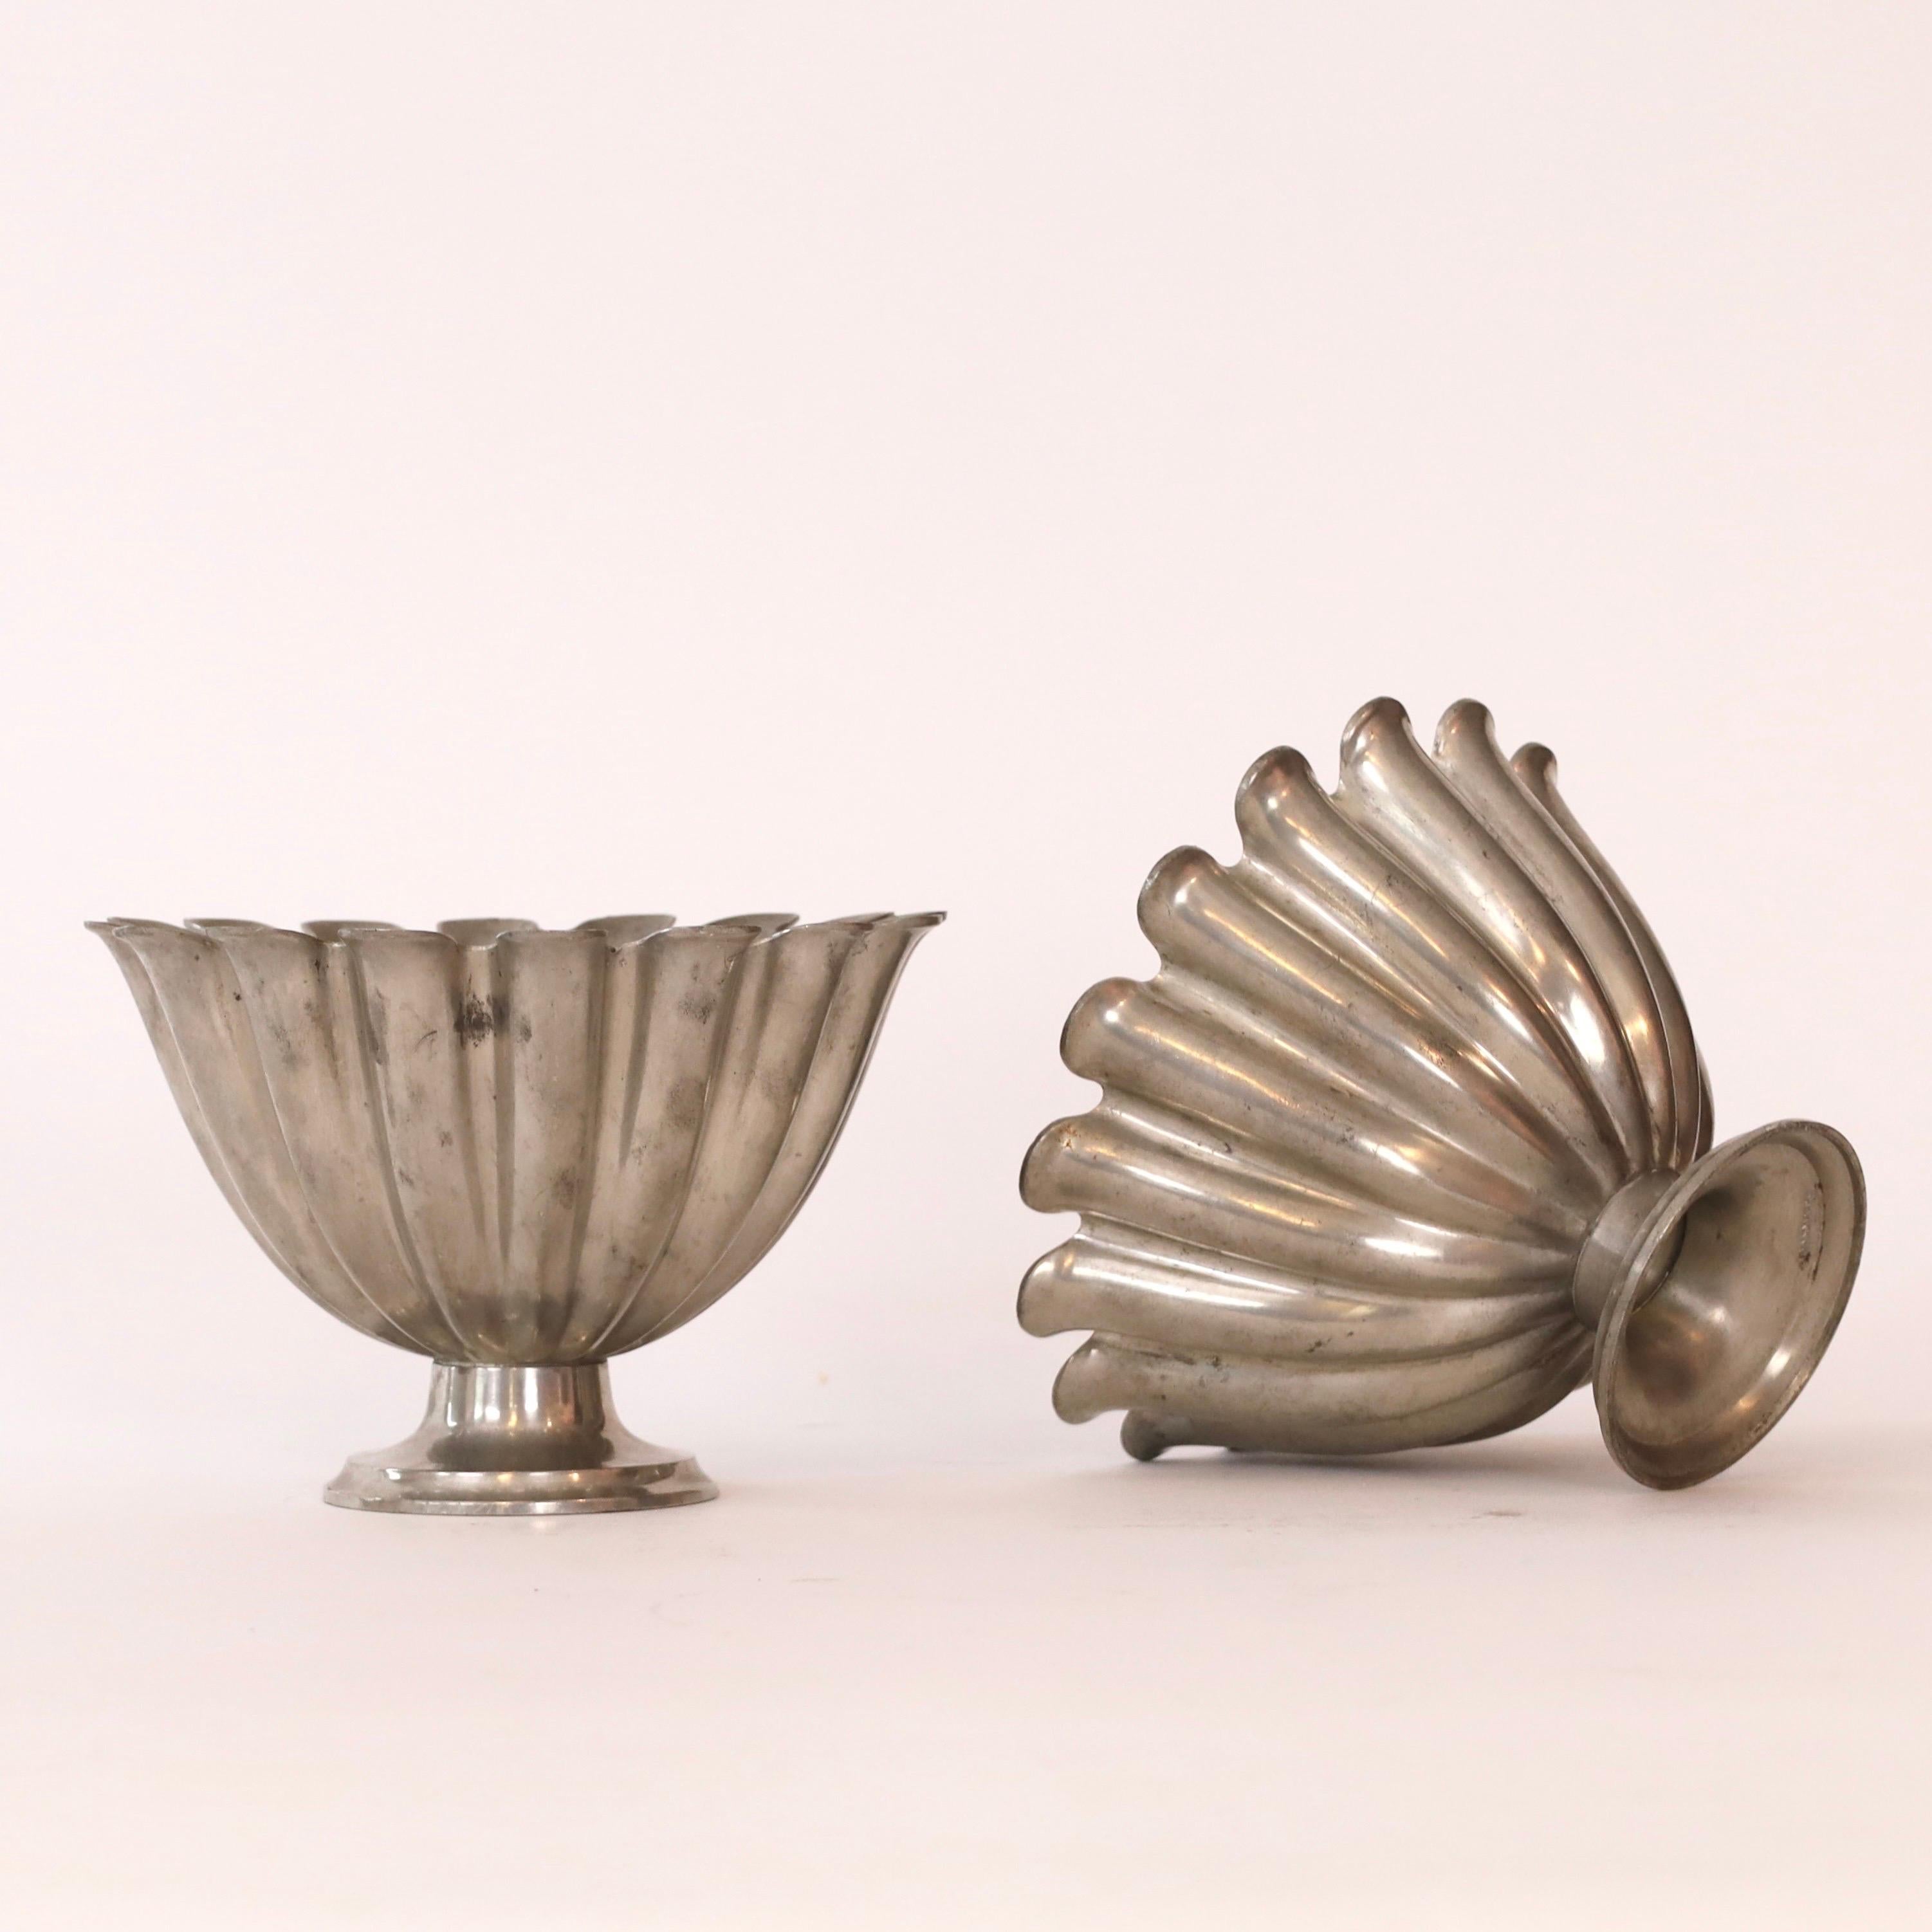 Pewter Pair of Scalloped pedestal pewter bowls by Just Andersen 1920s, Denmark For Sale